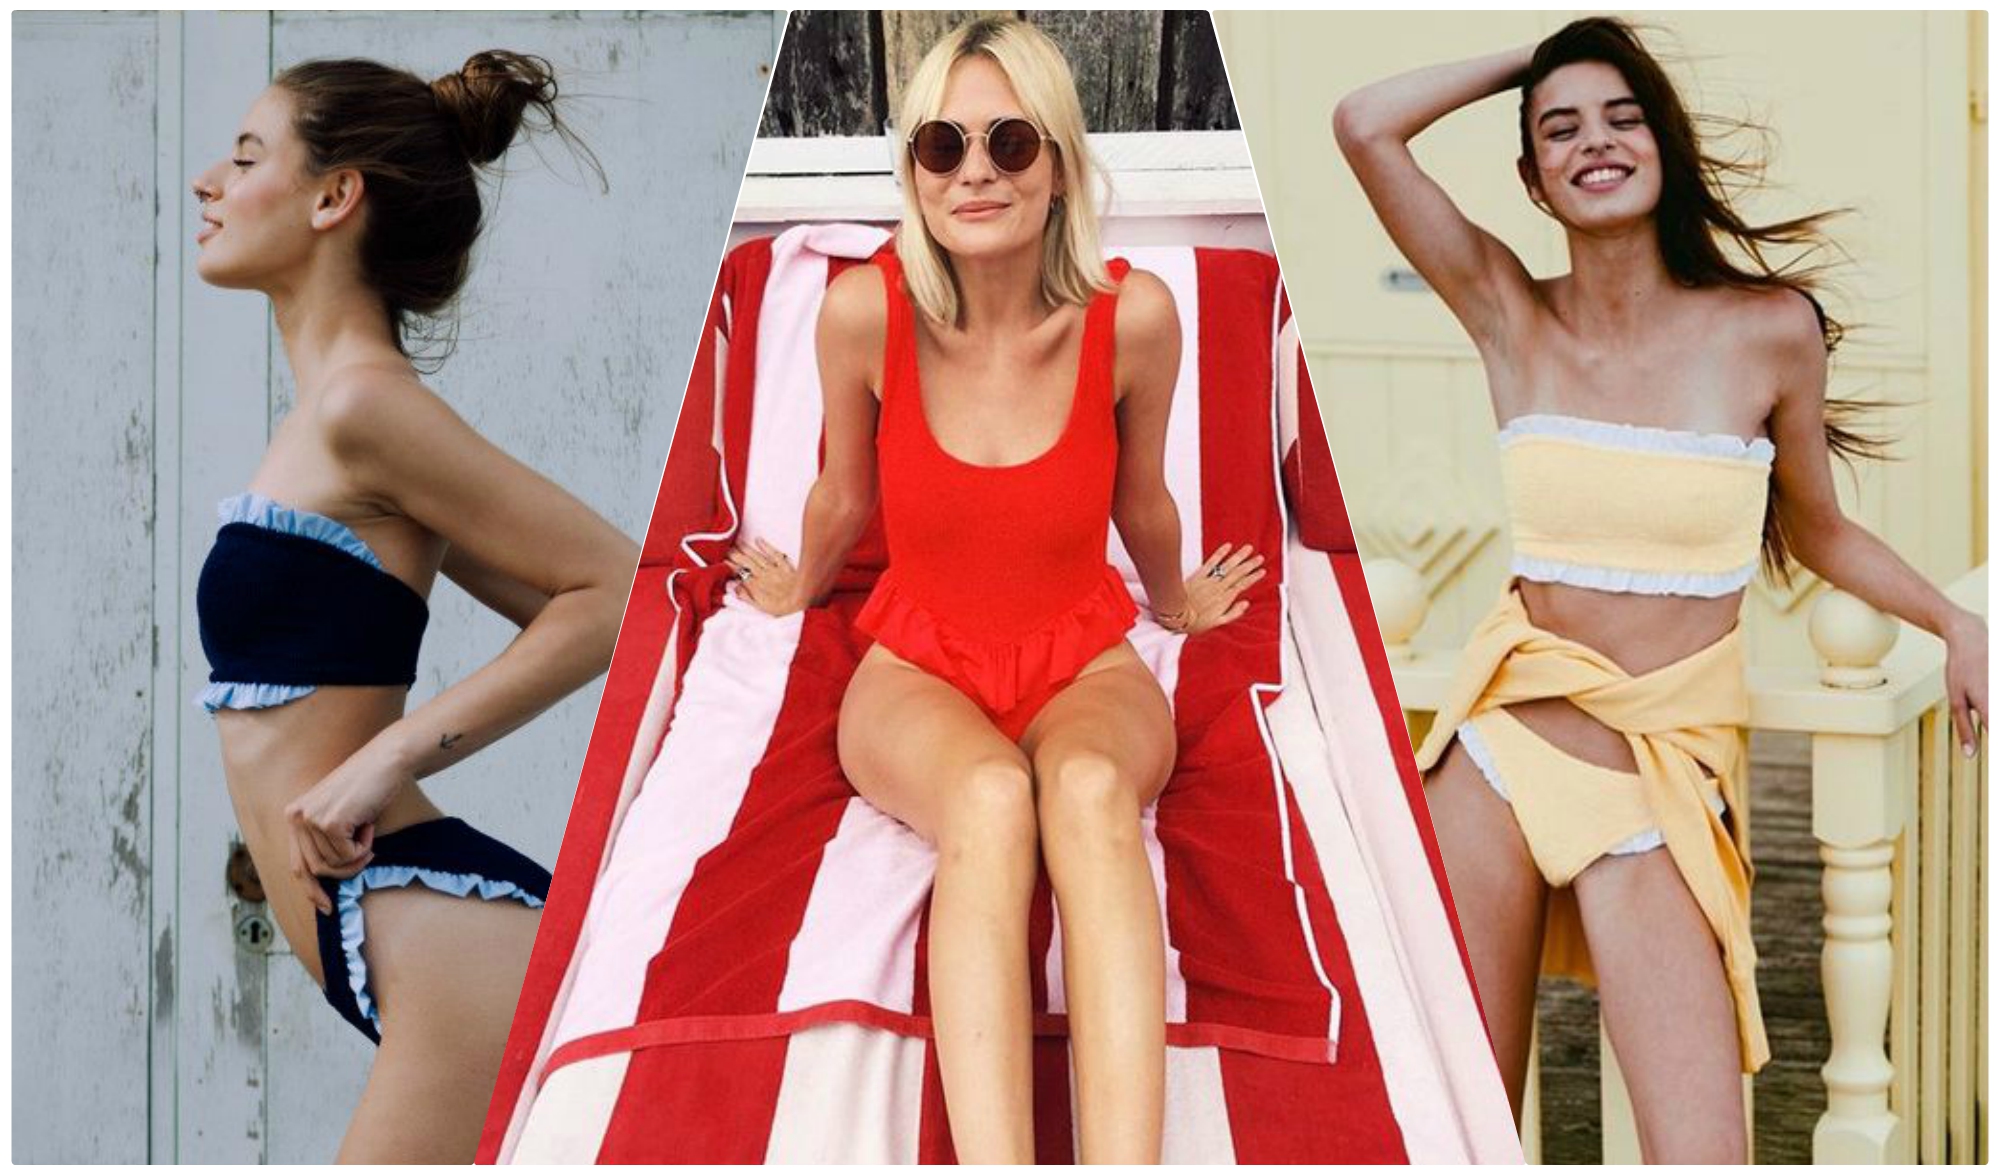 The Most Iconic Swimwear Brands3